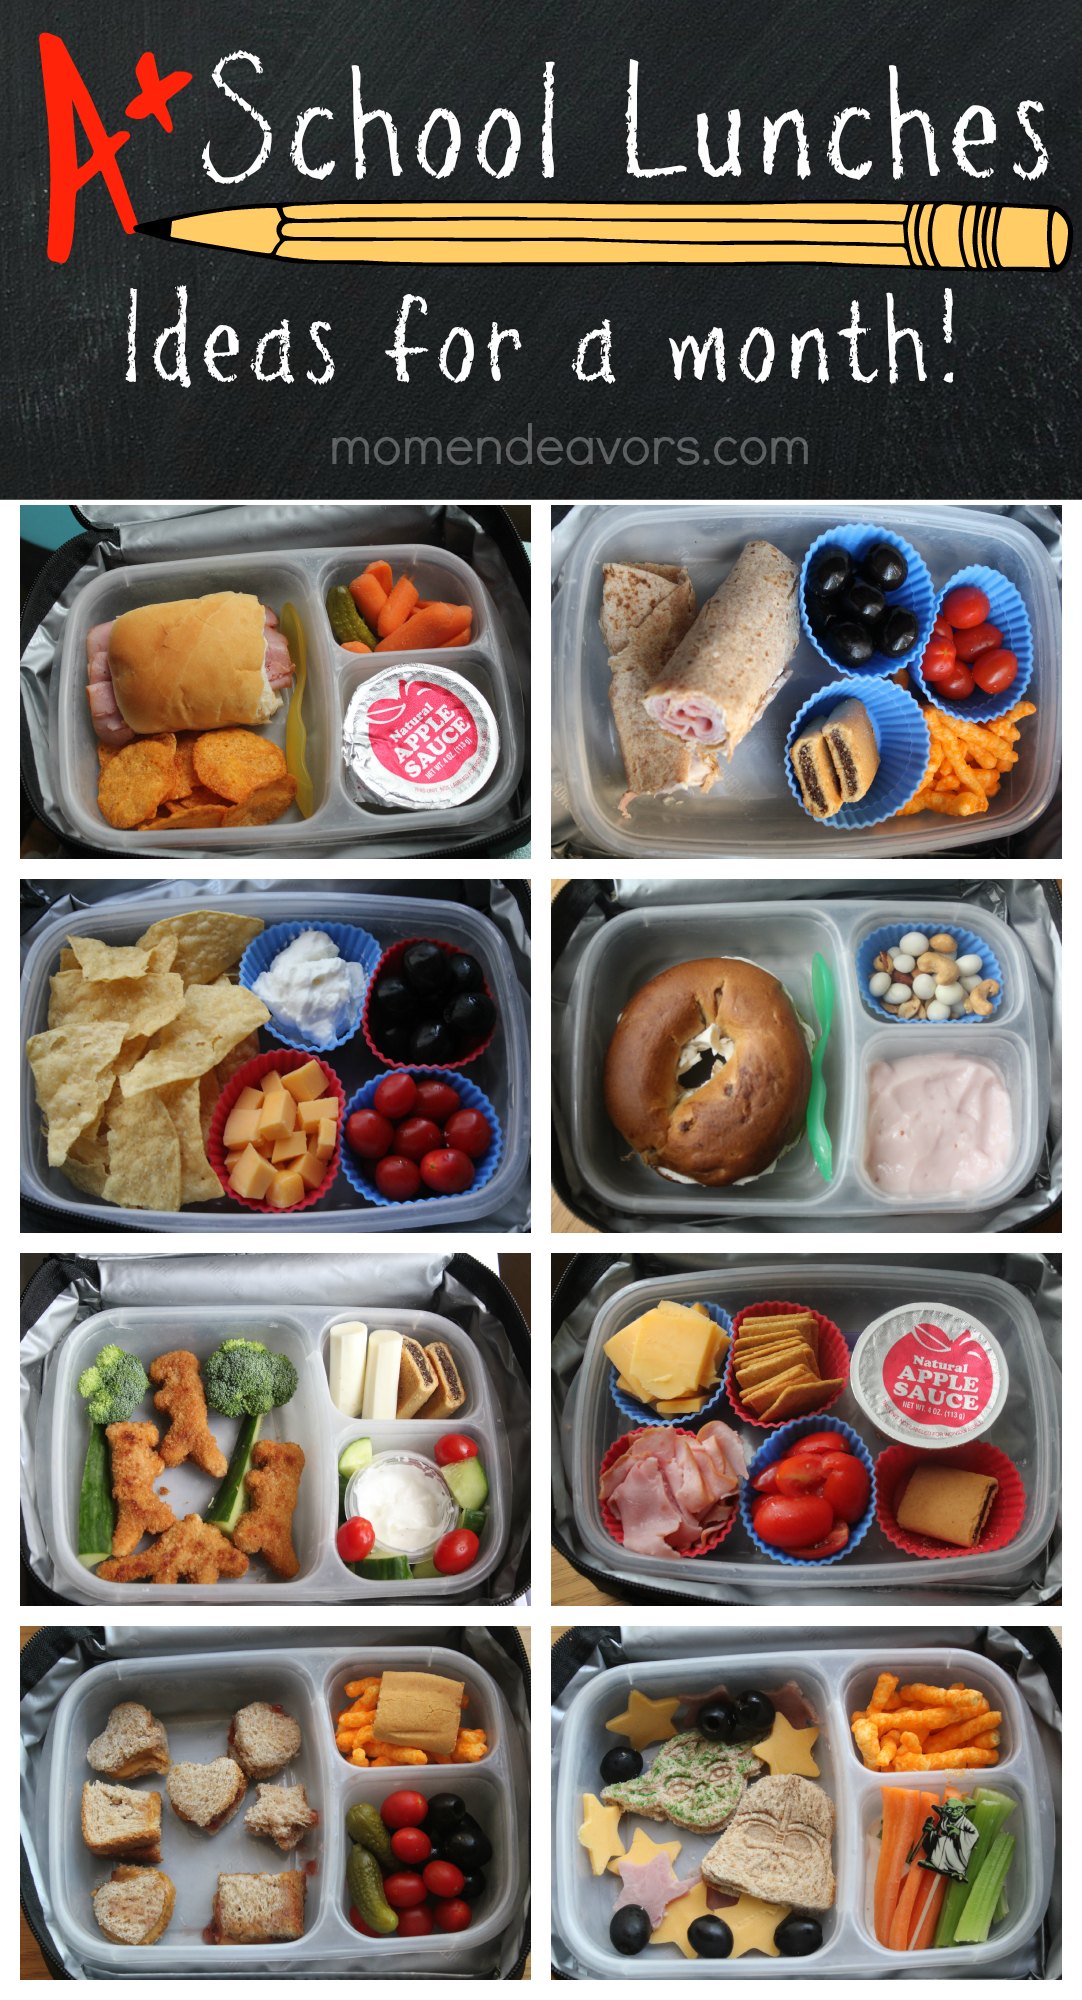 https://theeducatorsspinonit.com/wp-content/uploads/2015/08/A-month-of-school-lunch-ideas.jpg